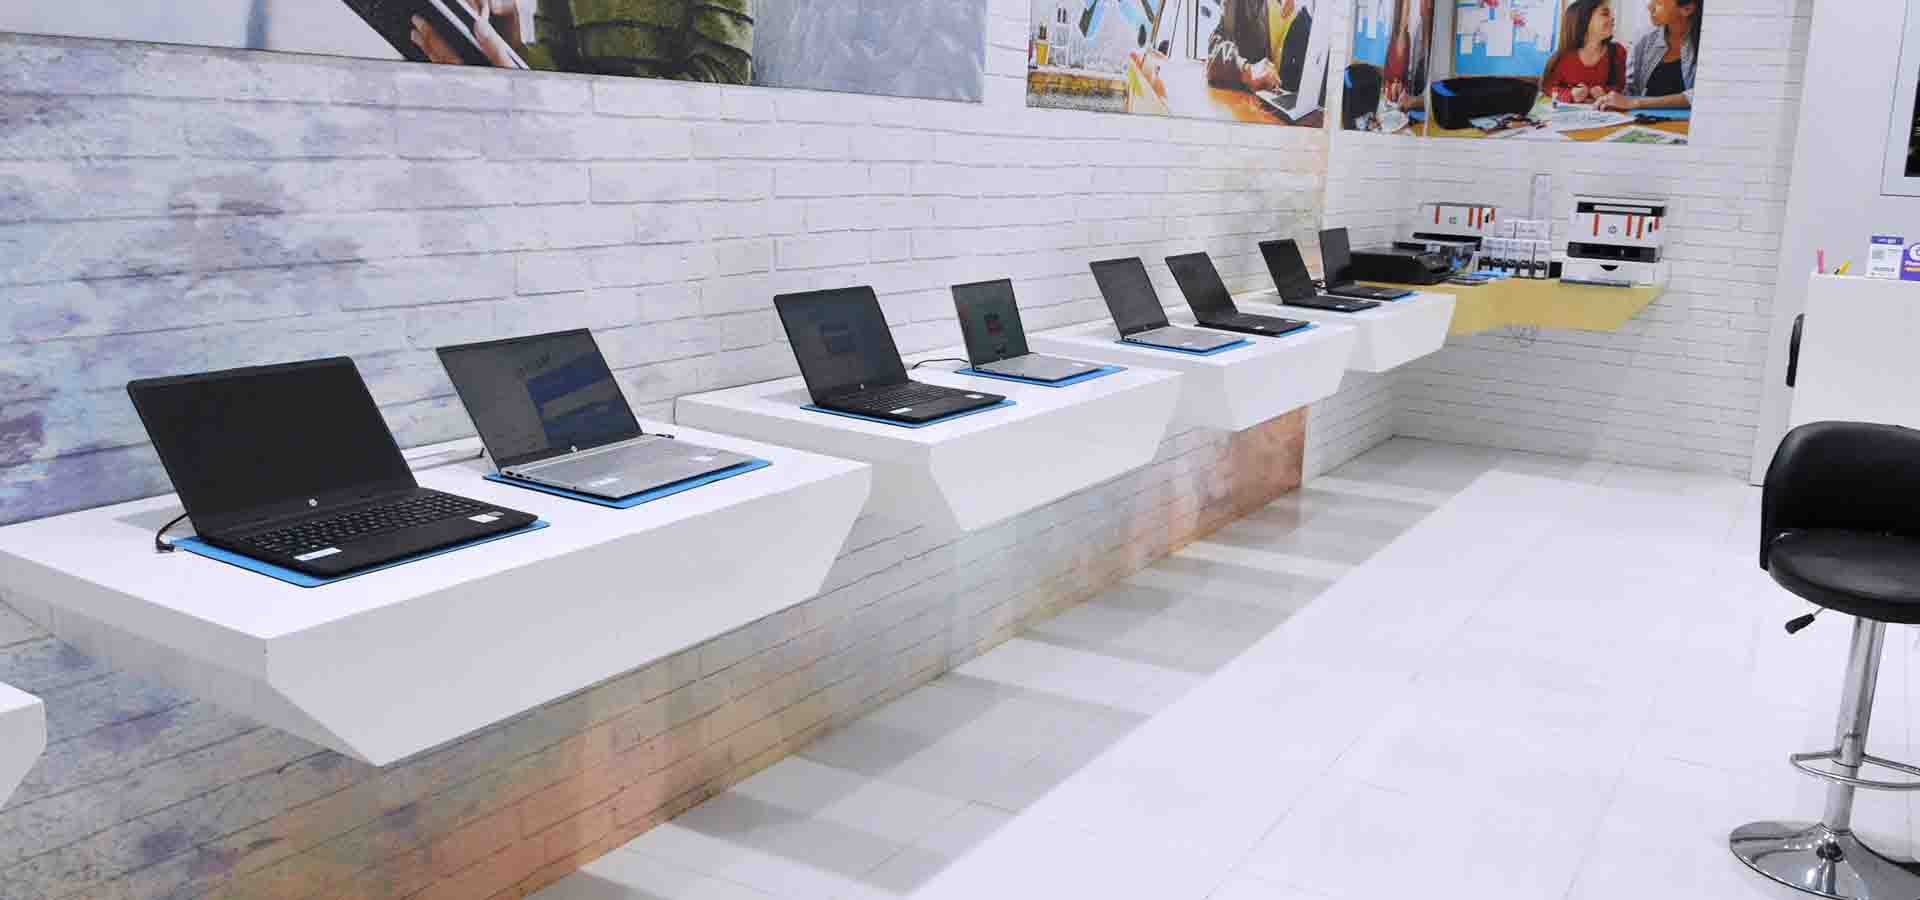 HP store photos in mall